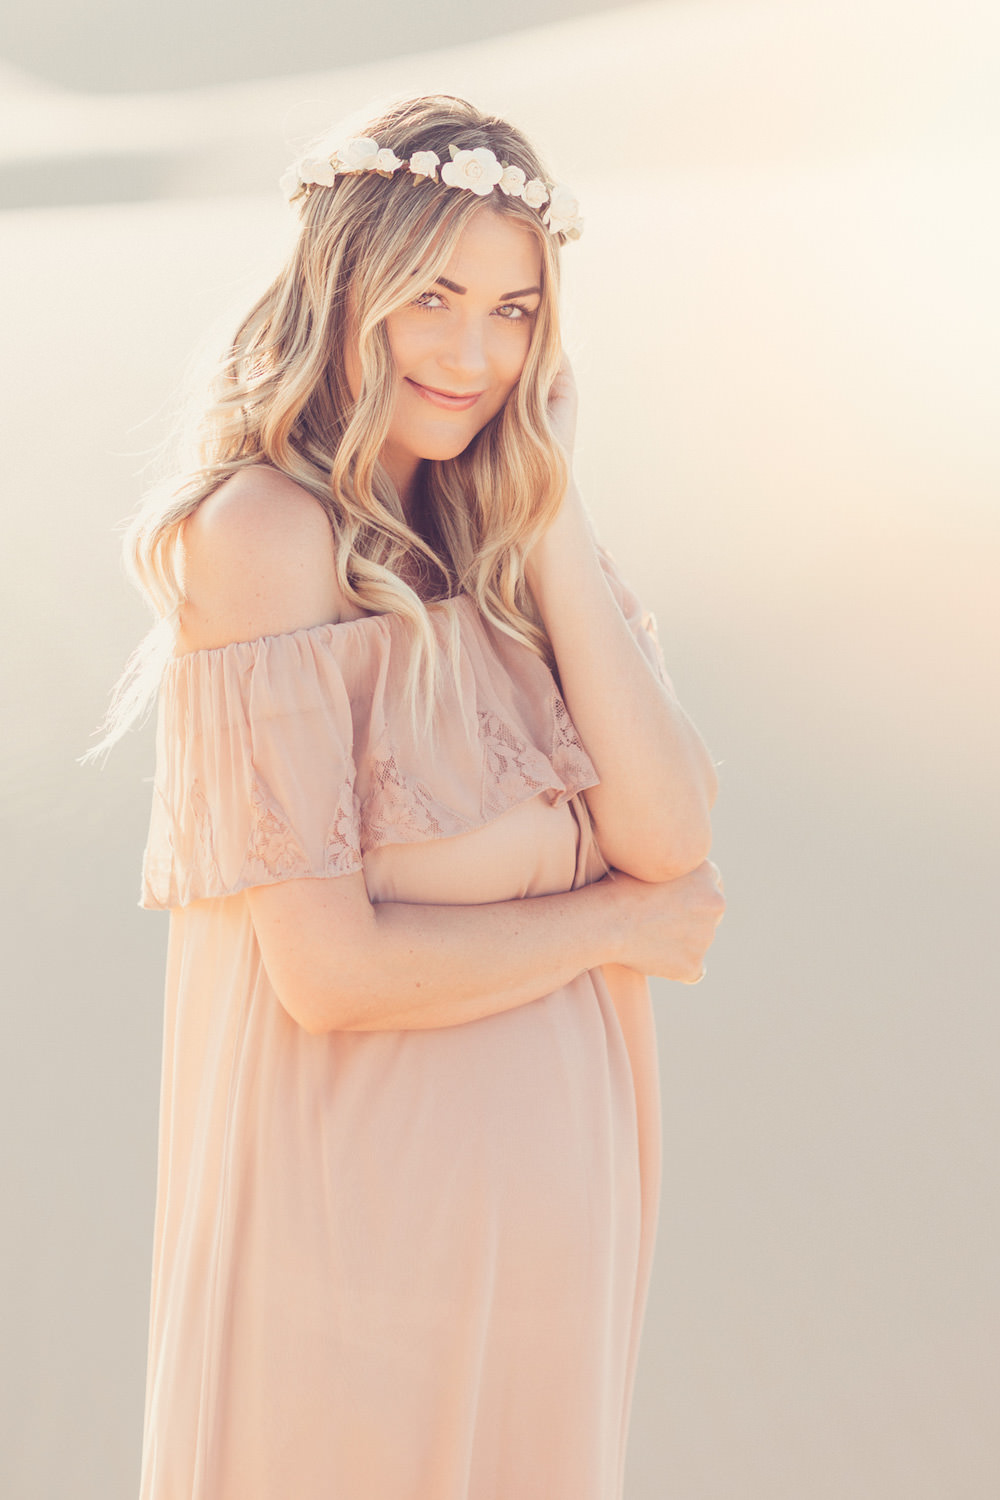 Caitlin Lindquist of the fashion blog Dash of Darling shares her pregnancy announcement after years of infertility, three rounds of IVF and two miscarriages.